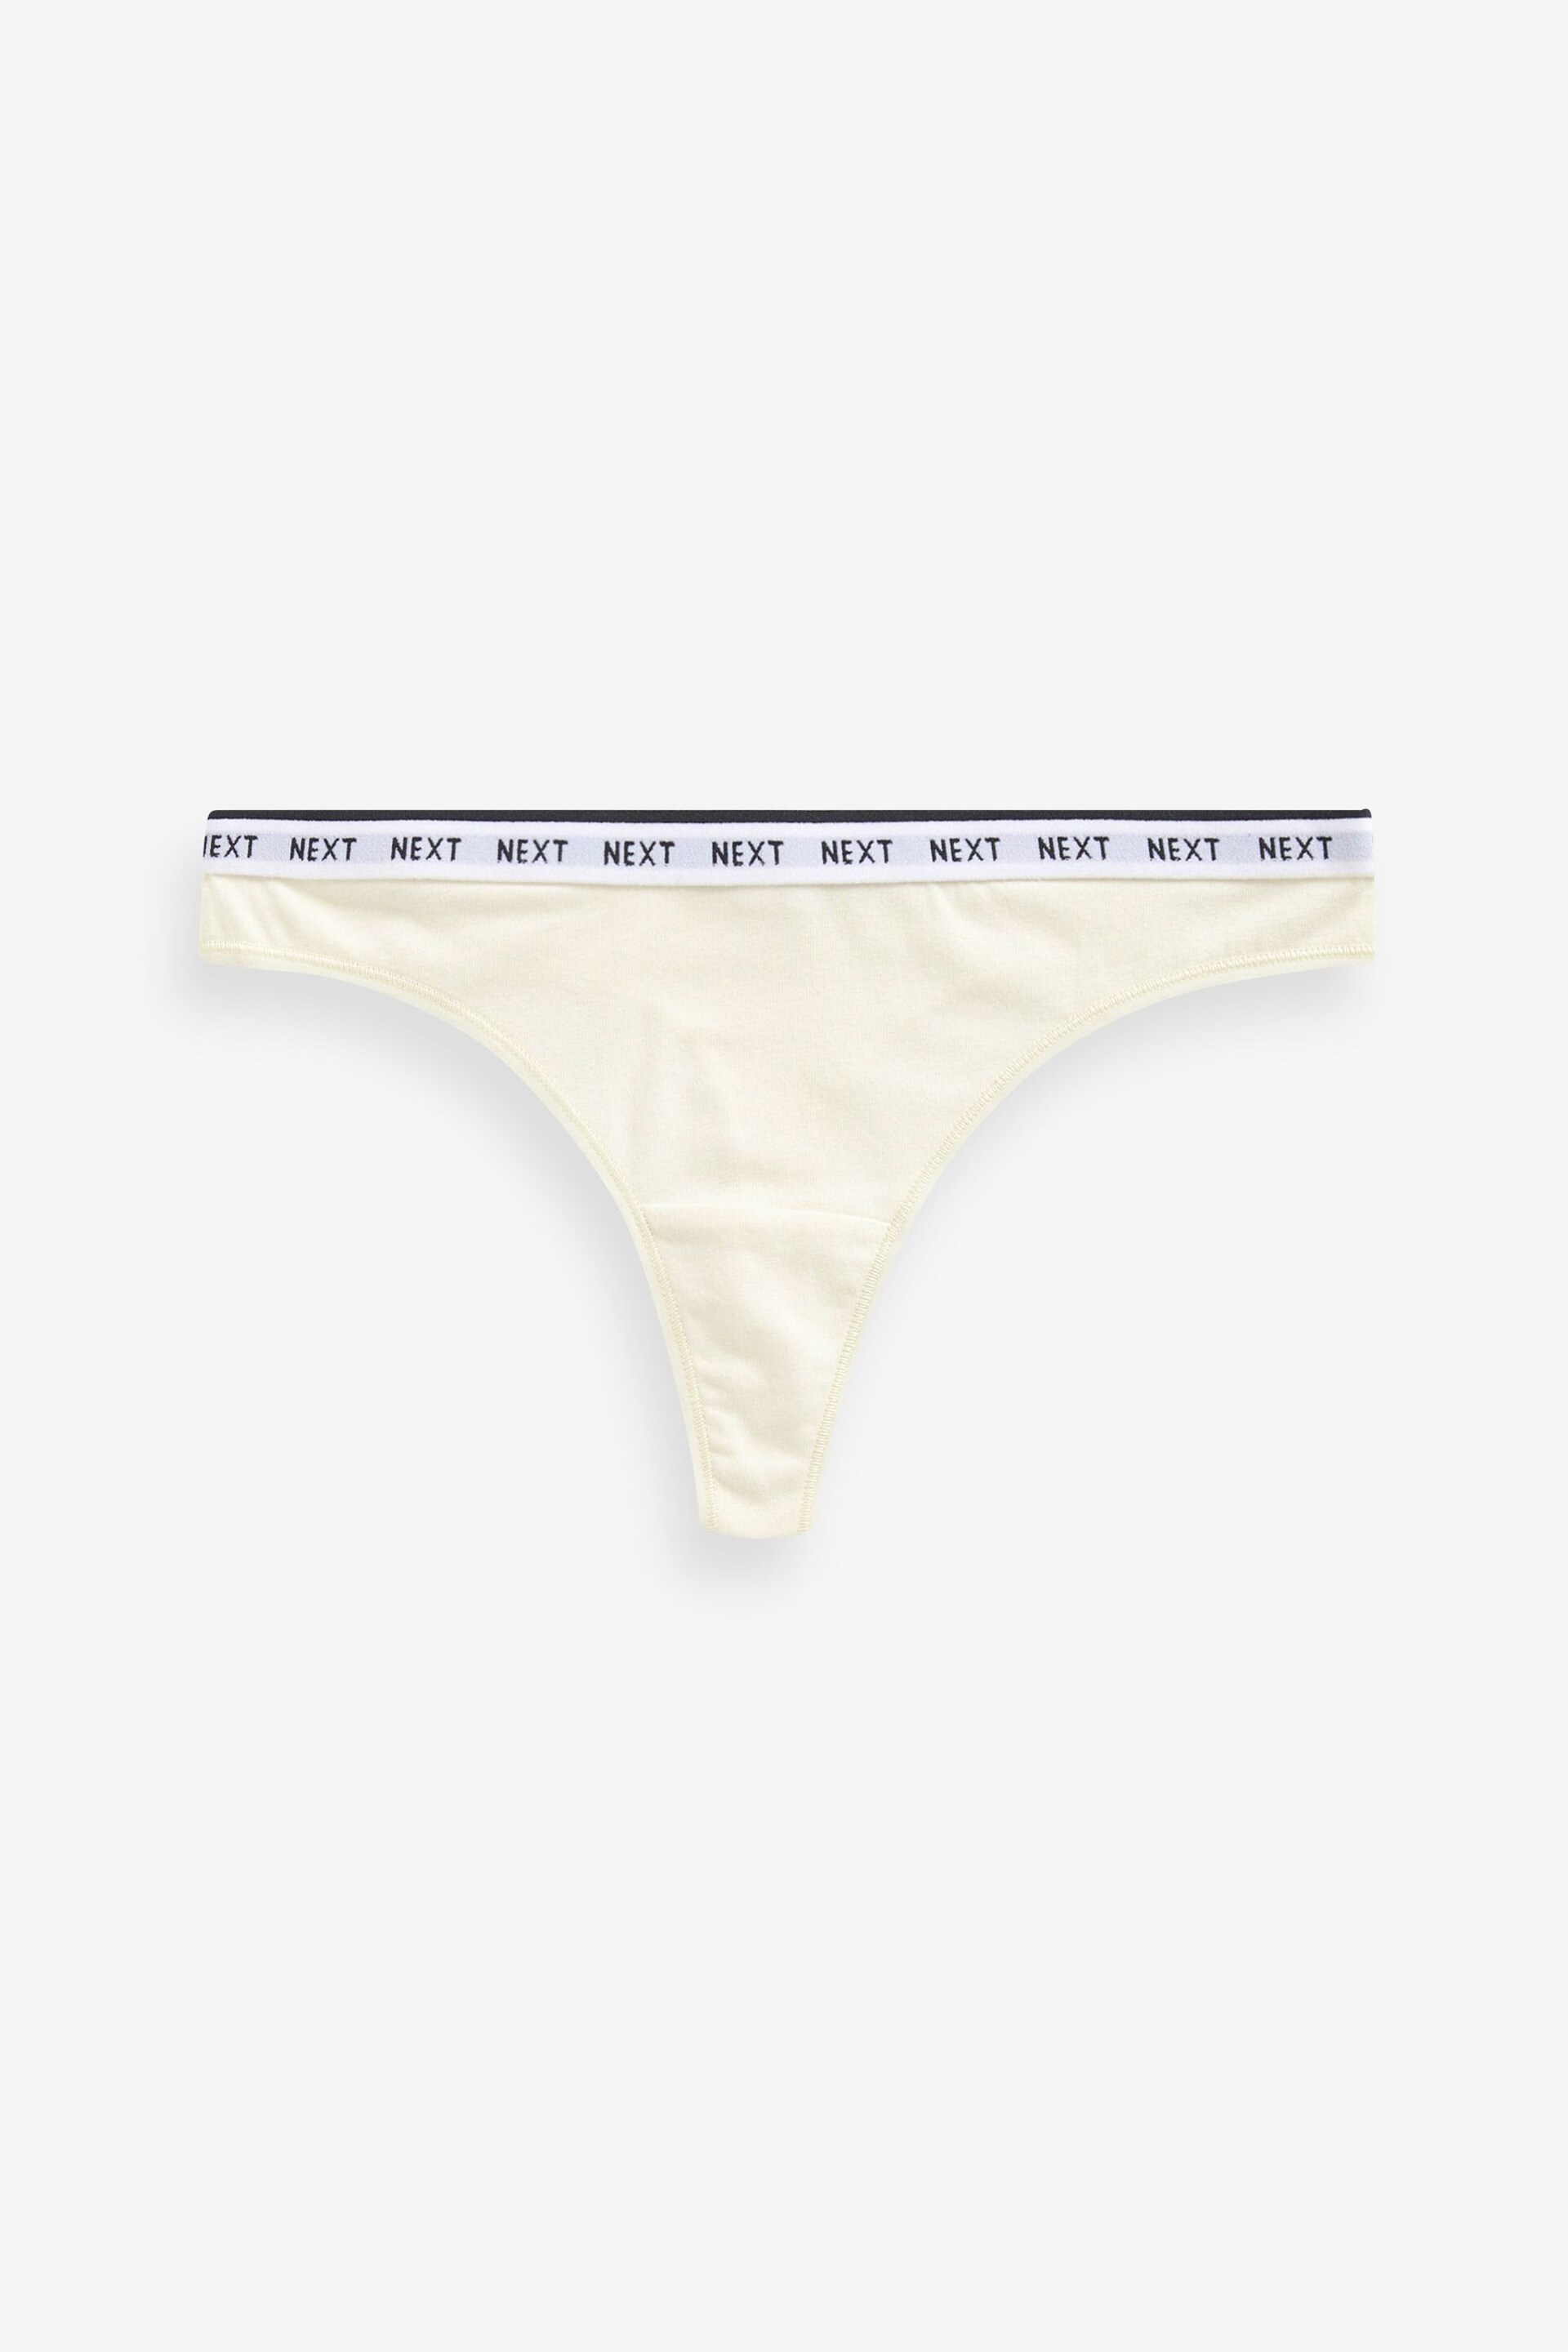 Navy/ Pink Spot Thong Cotton Rich Logo Knickers 4 Pack - Image 8 of 8